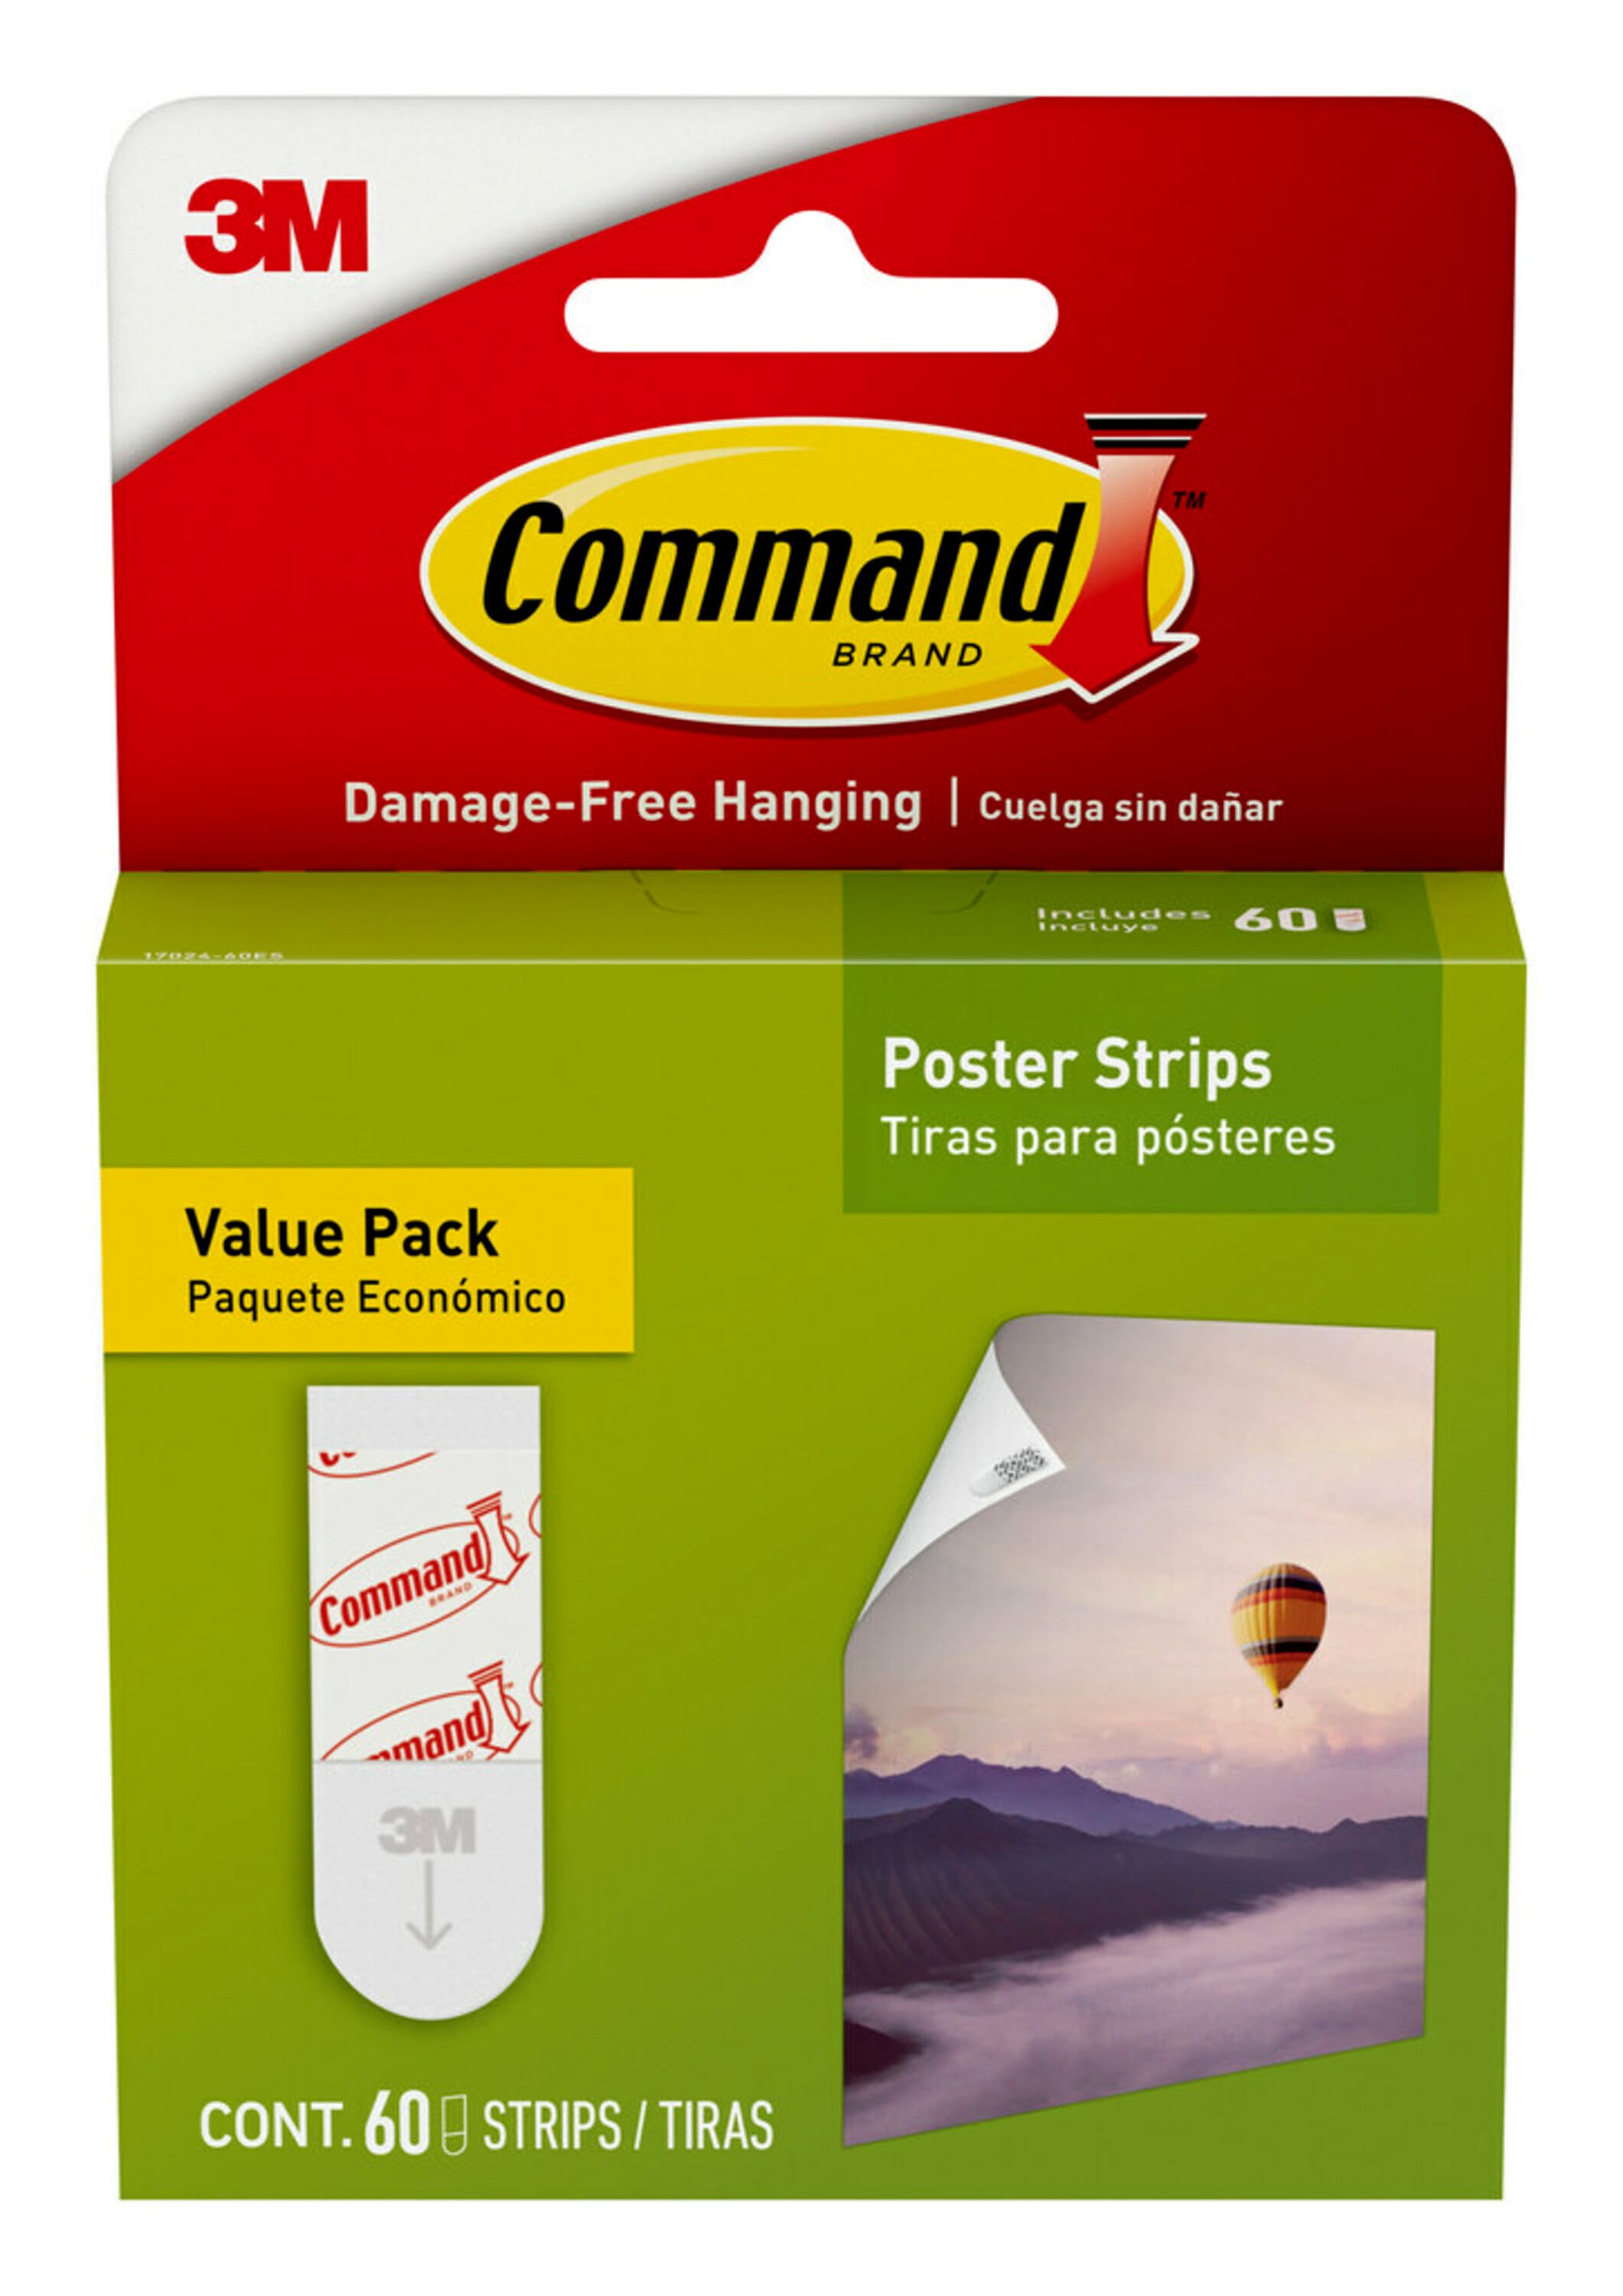 Command Poster Strips, White, Damage-Free Hanging, 60 Command Strips - image 1 of 13